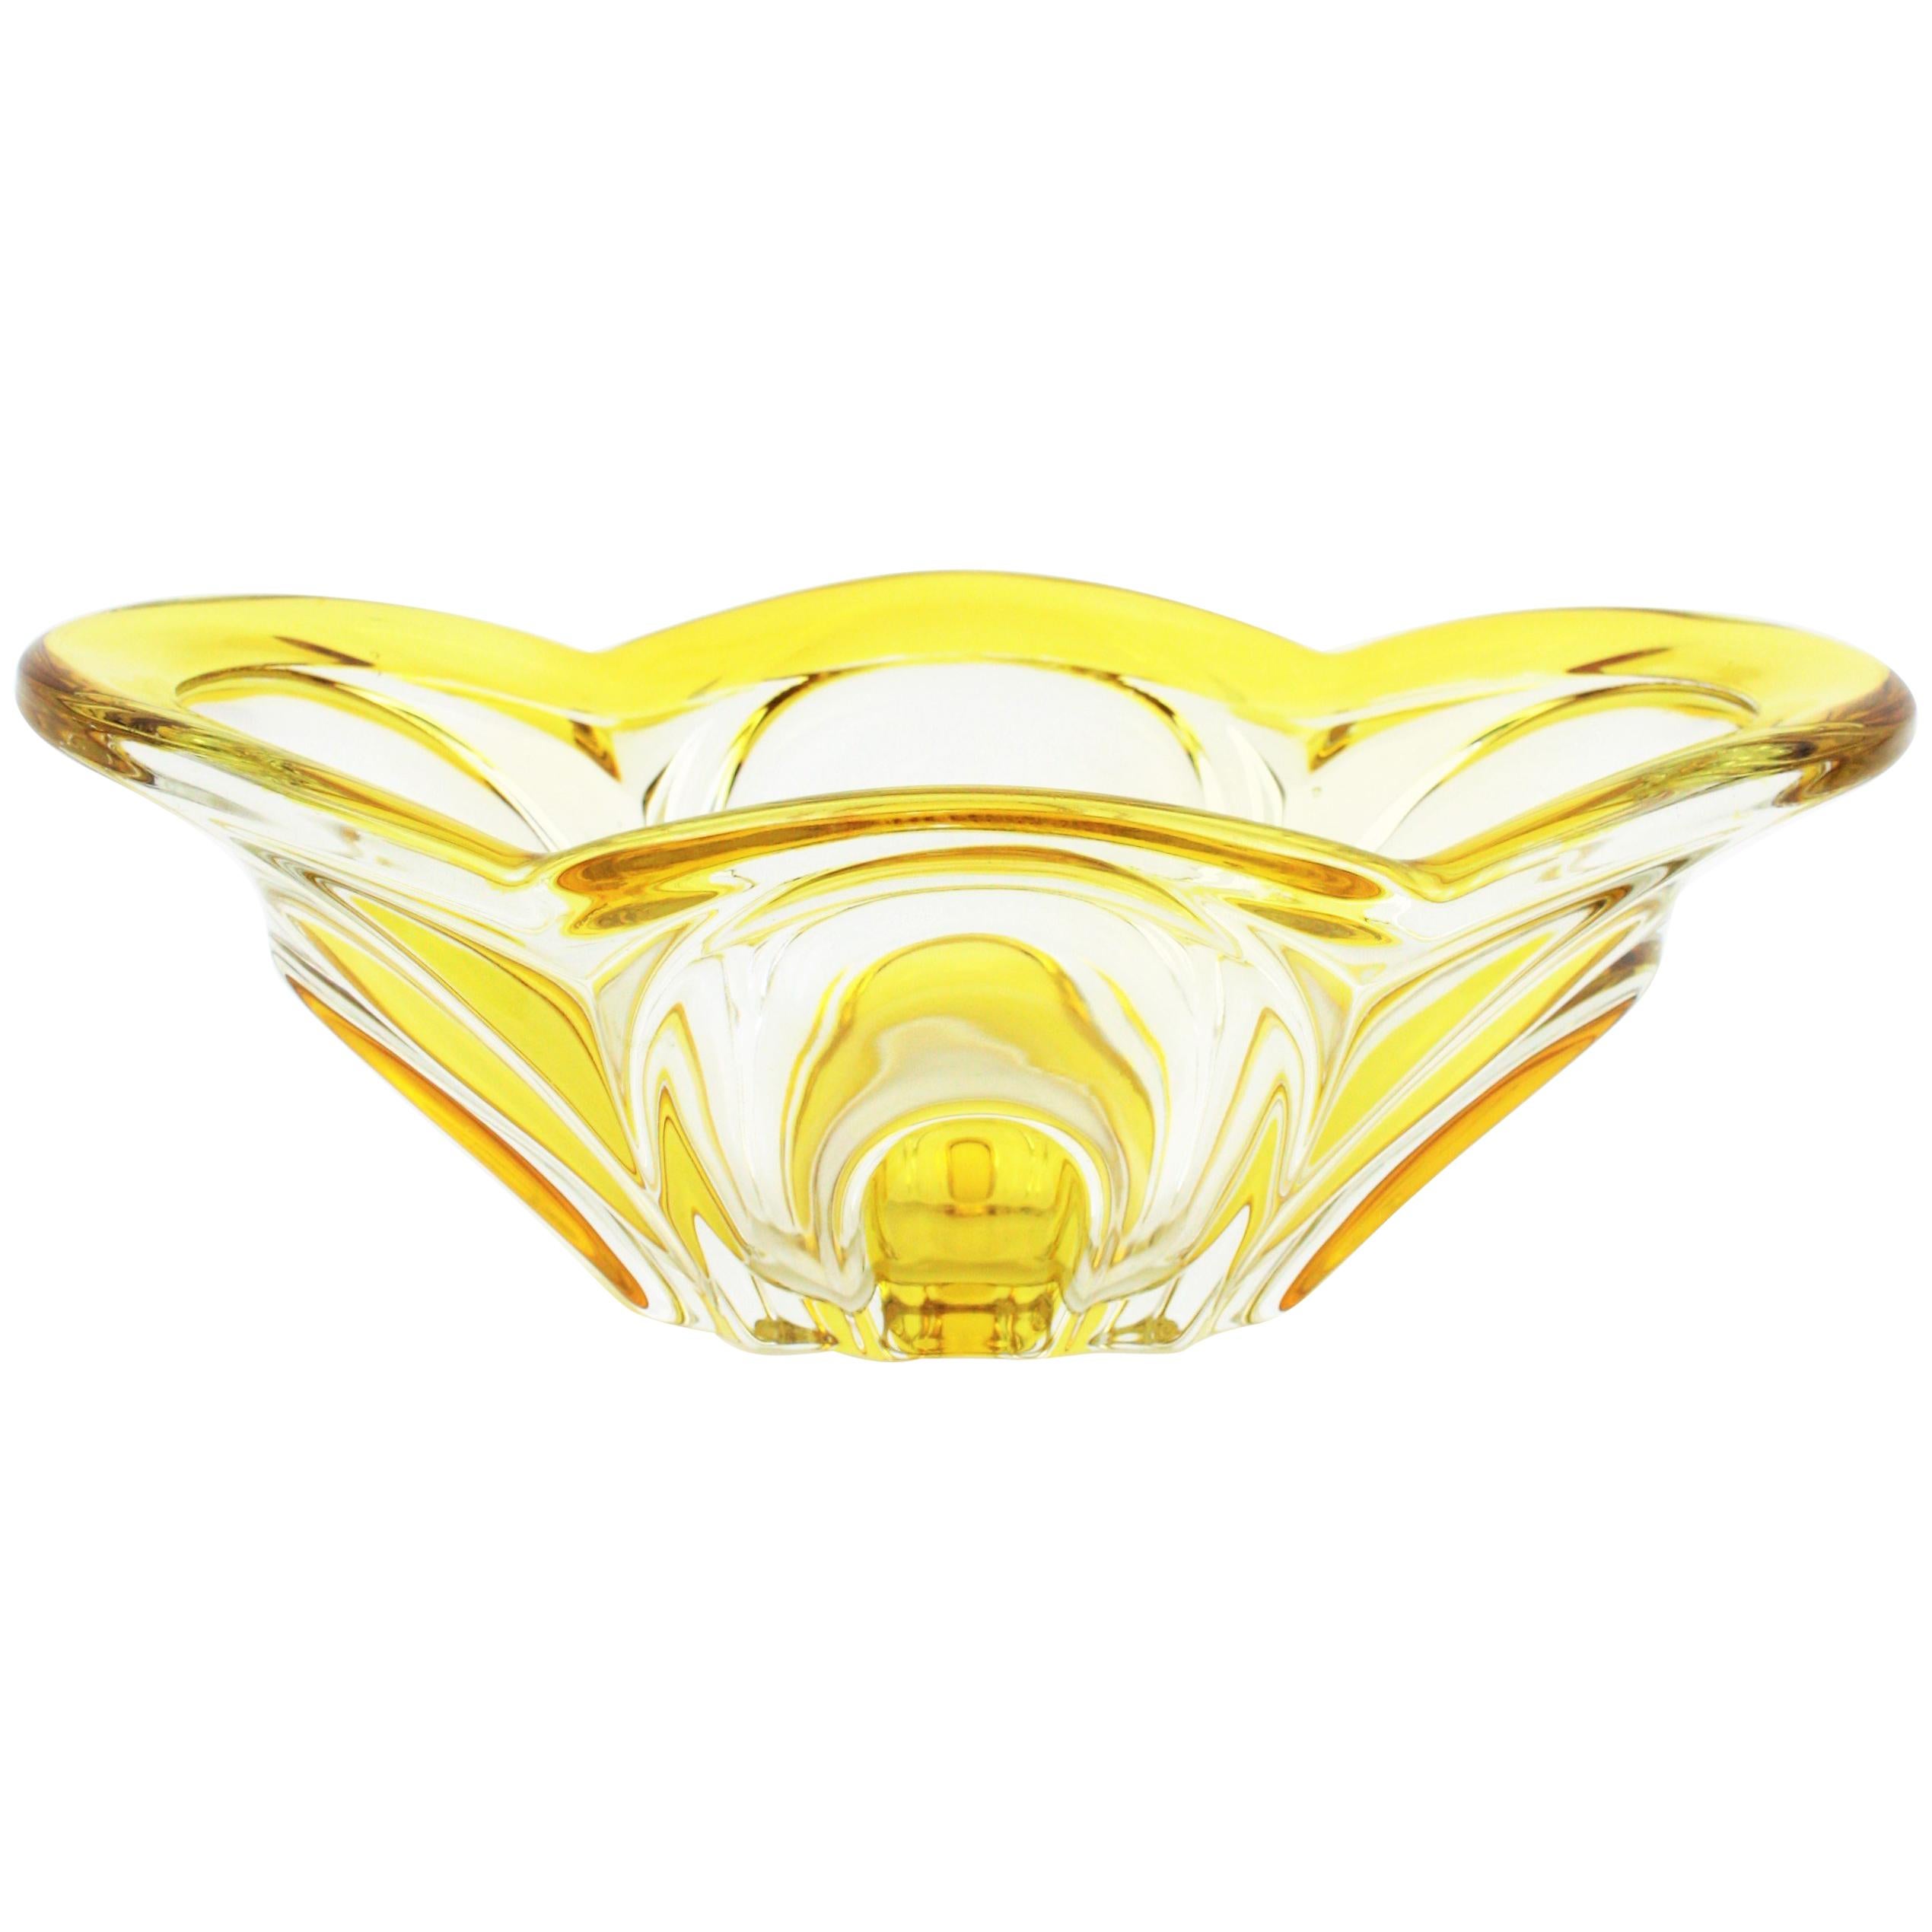 Italian 1950s Scalloped Sommerso Yellow and Clear Murano Glass Centrepiece